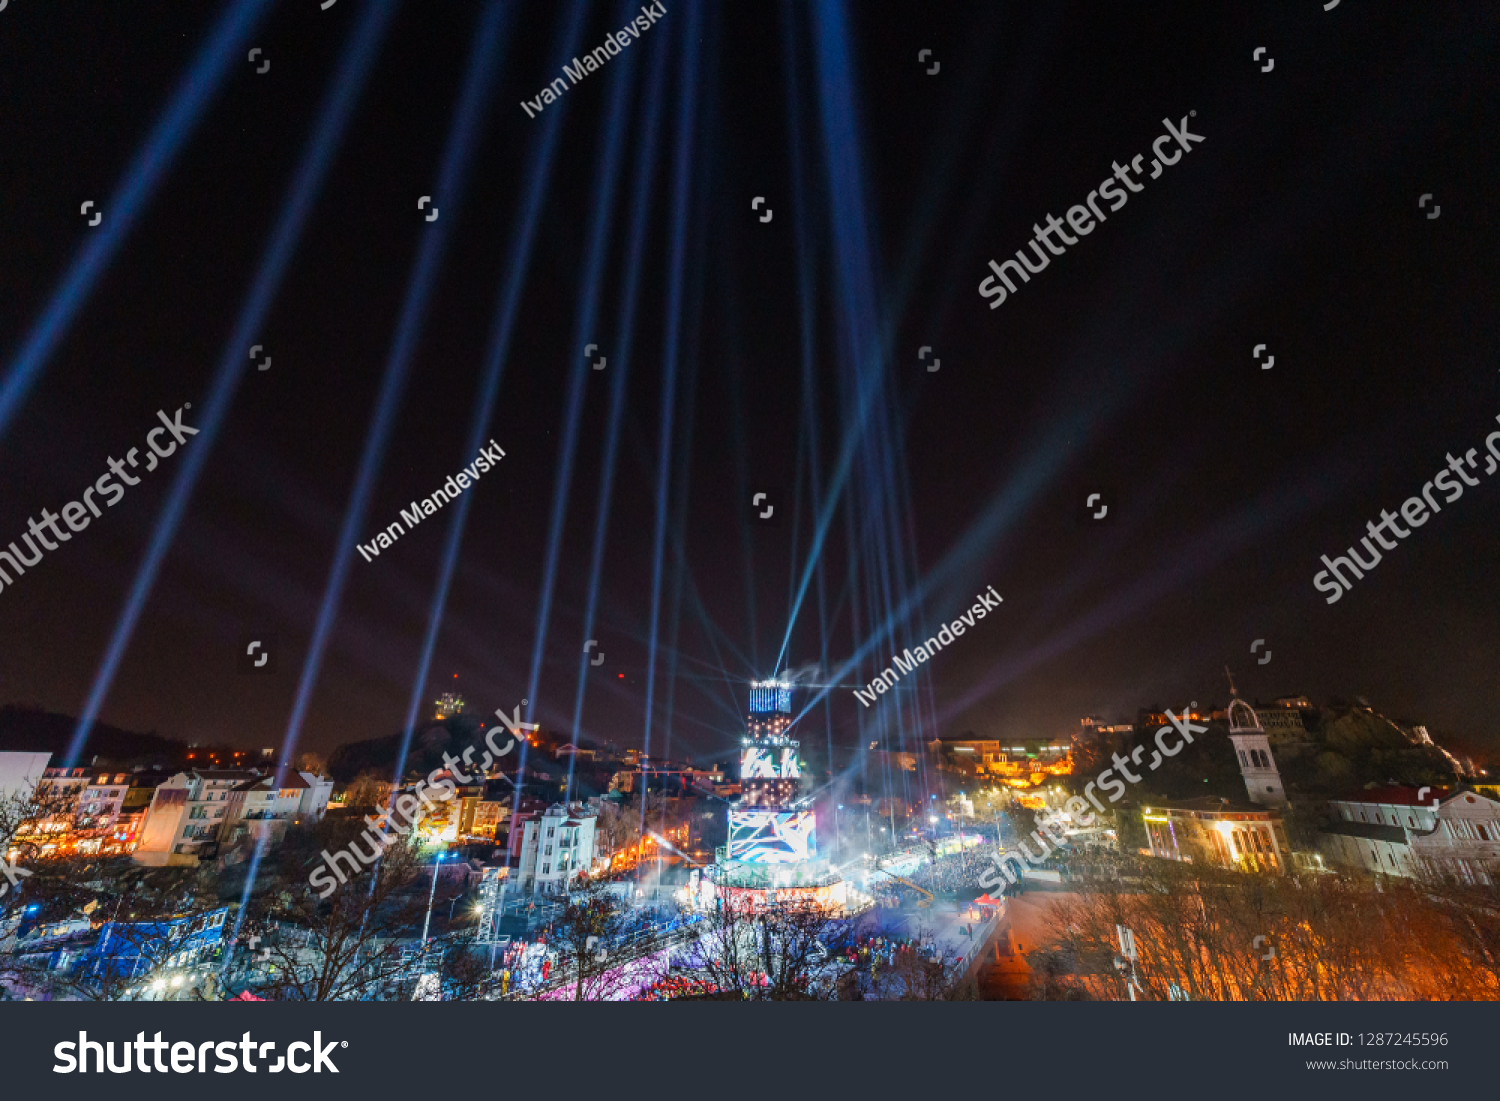 PLOVDIV, BULGARIA - JANUARY 12, 2019 - Main tower stage and fireworks for the opening event of European Capital of Culture - Plovdiv 2019. Light show at night. #1287245596